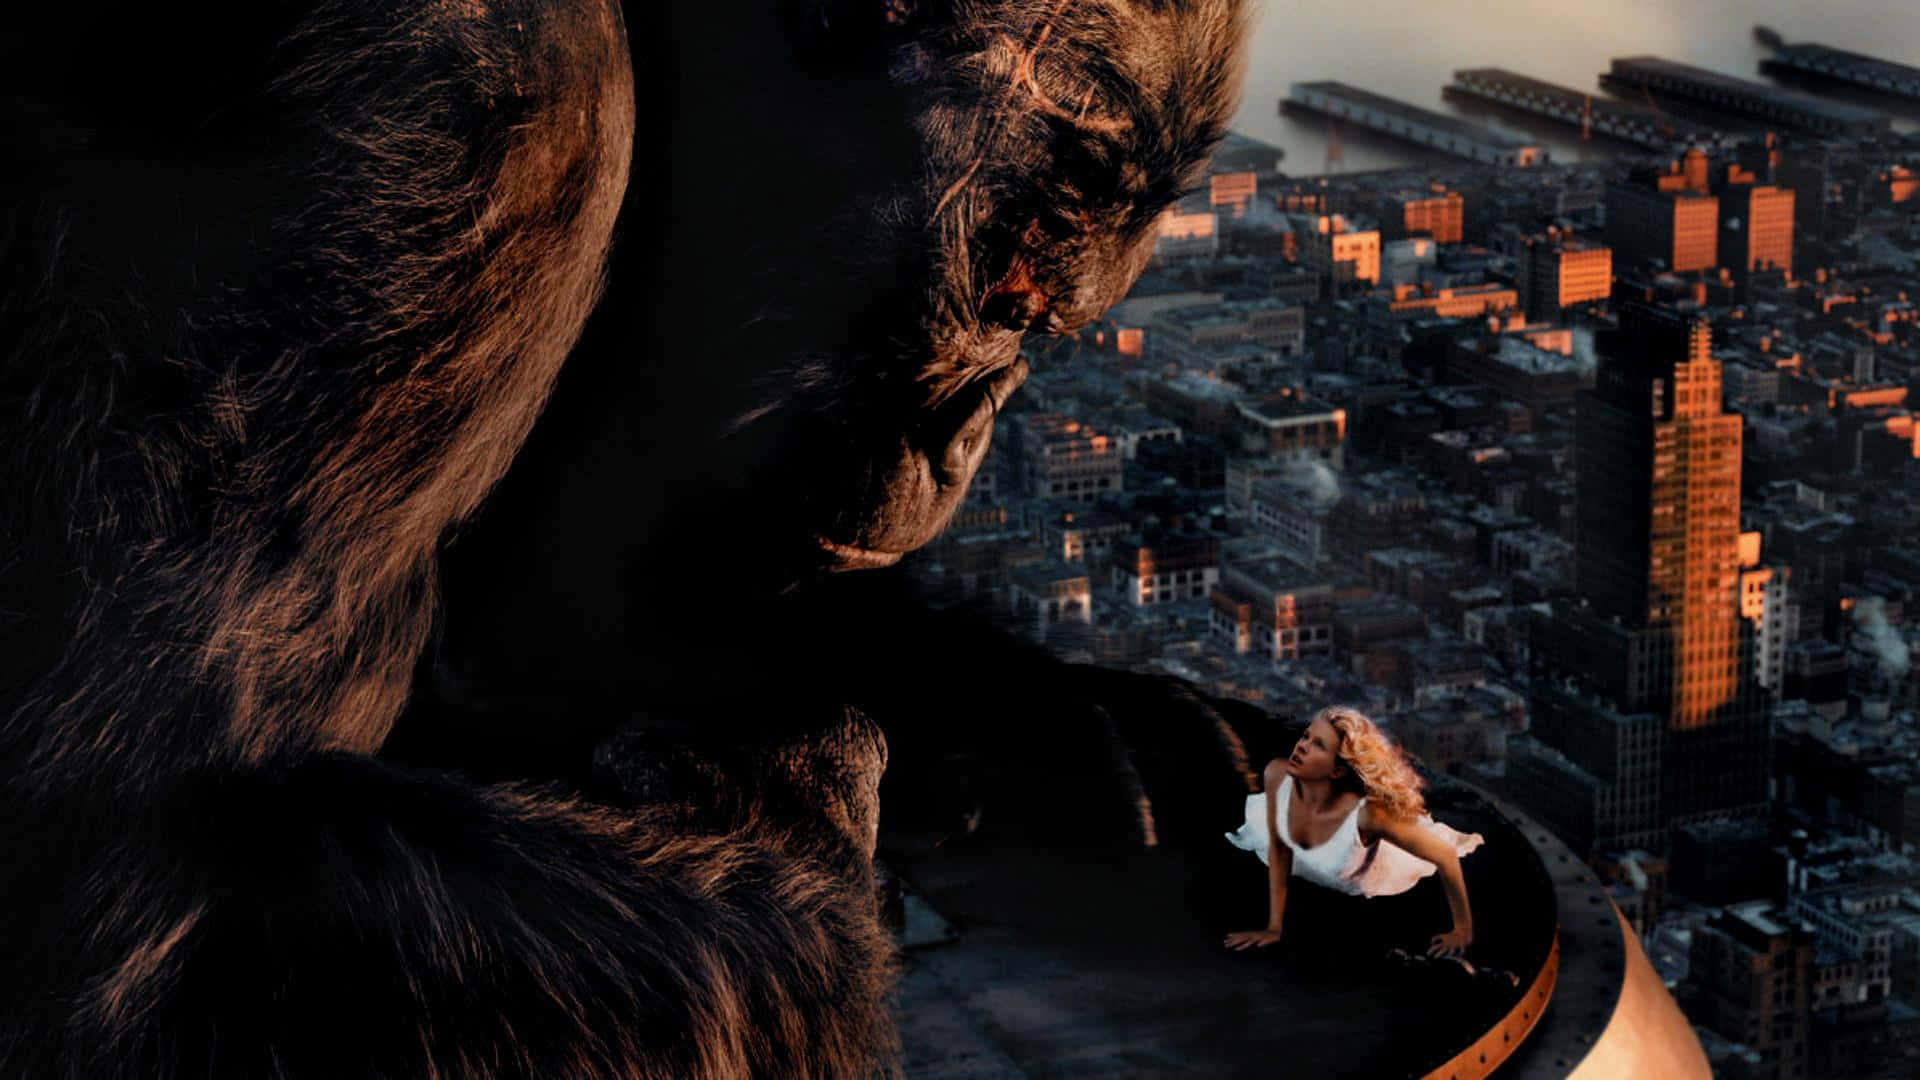 Image  A giant king kong atop New York's tallest skyscraper